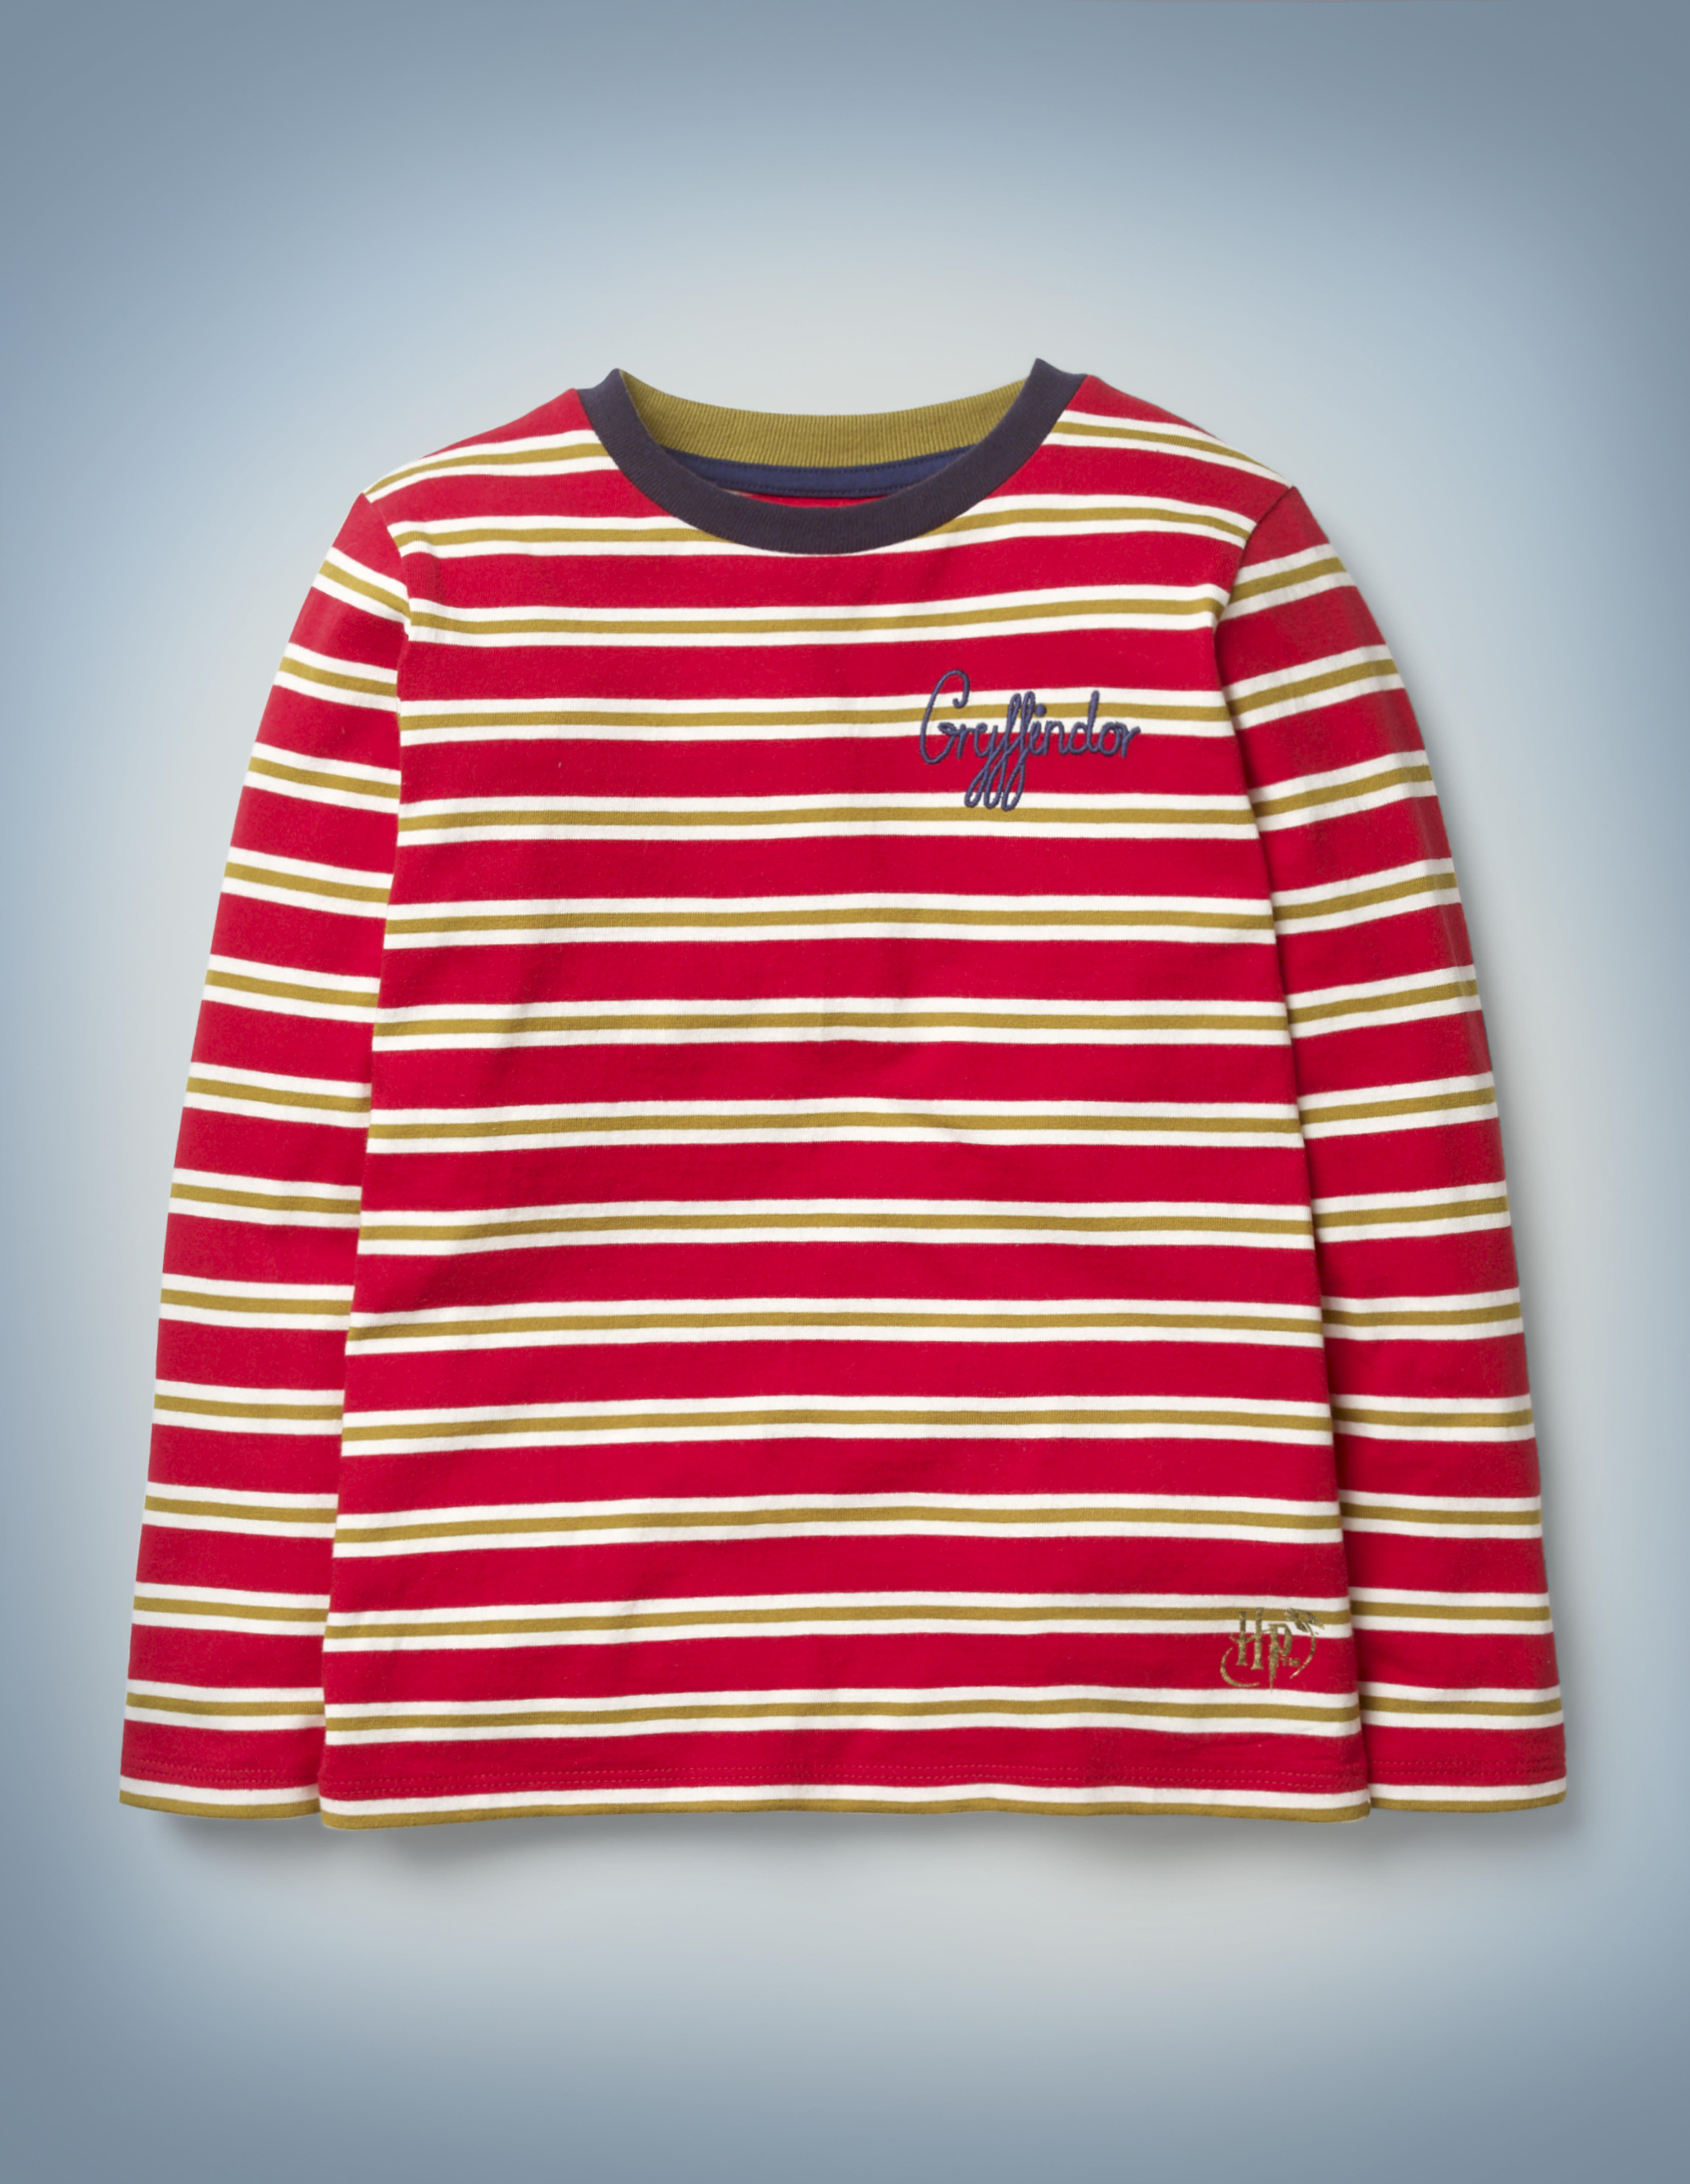 The Mini Boden House Breton in red features all-over red and gold stripes, a blue collar, and “Gryffindor” written in blue script in the front pocket area. It retails between £20 and £22.